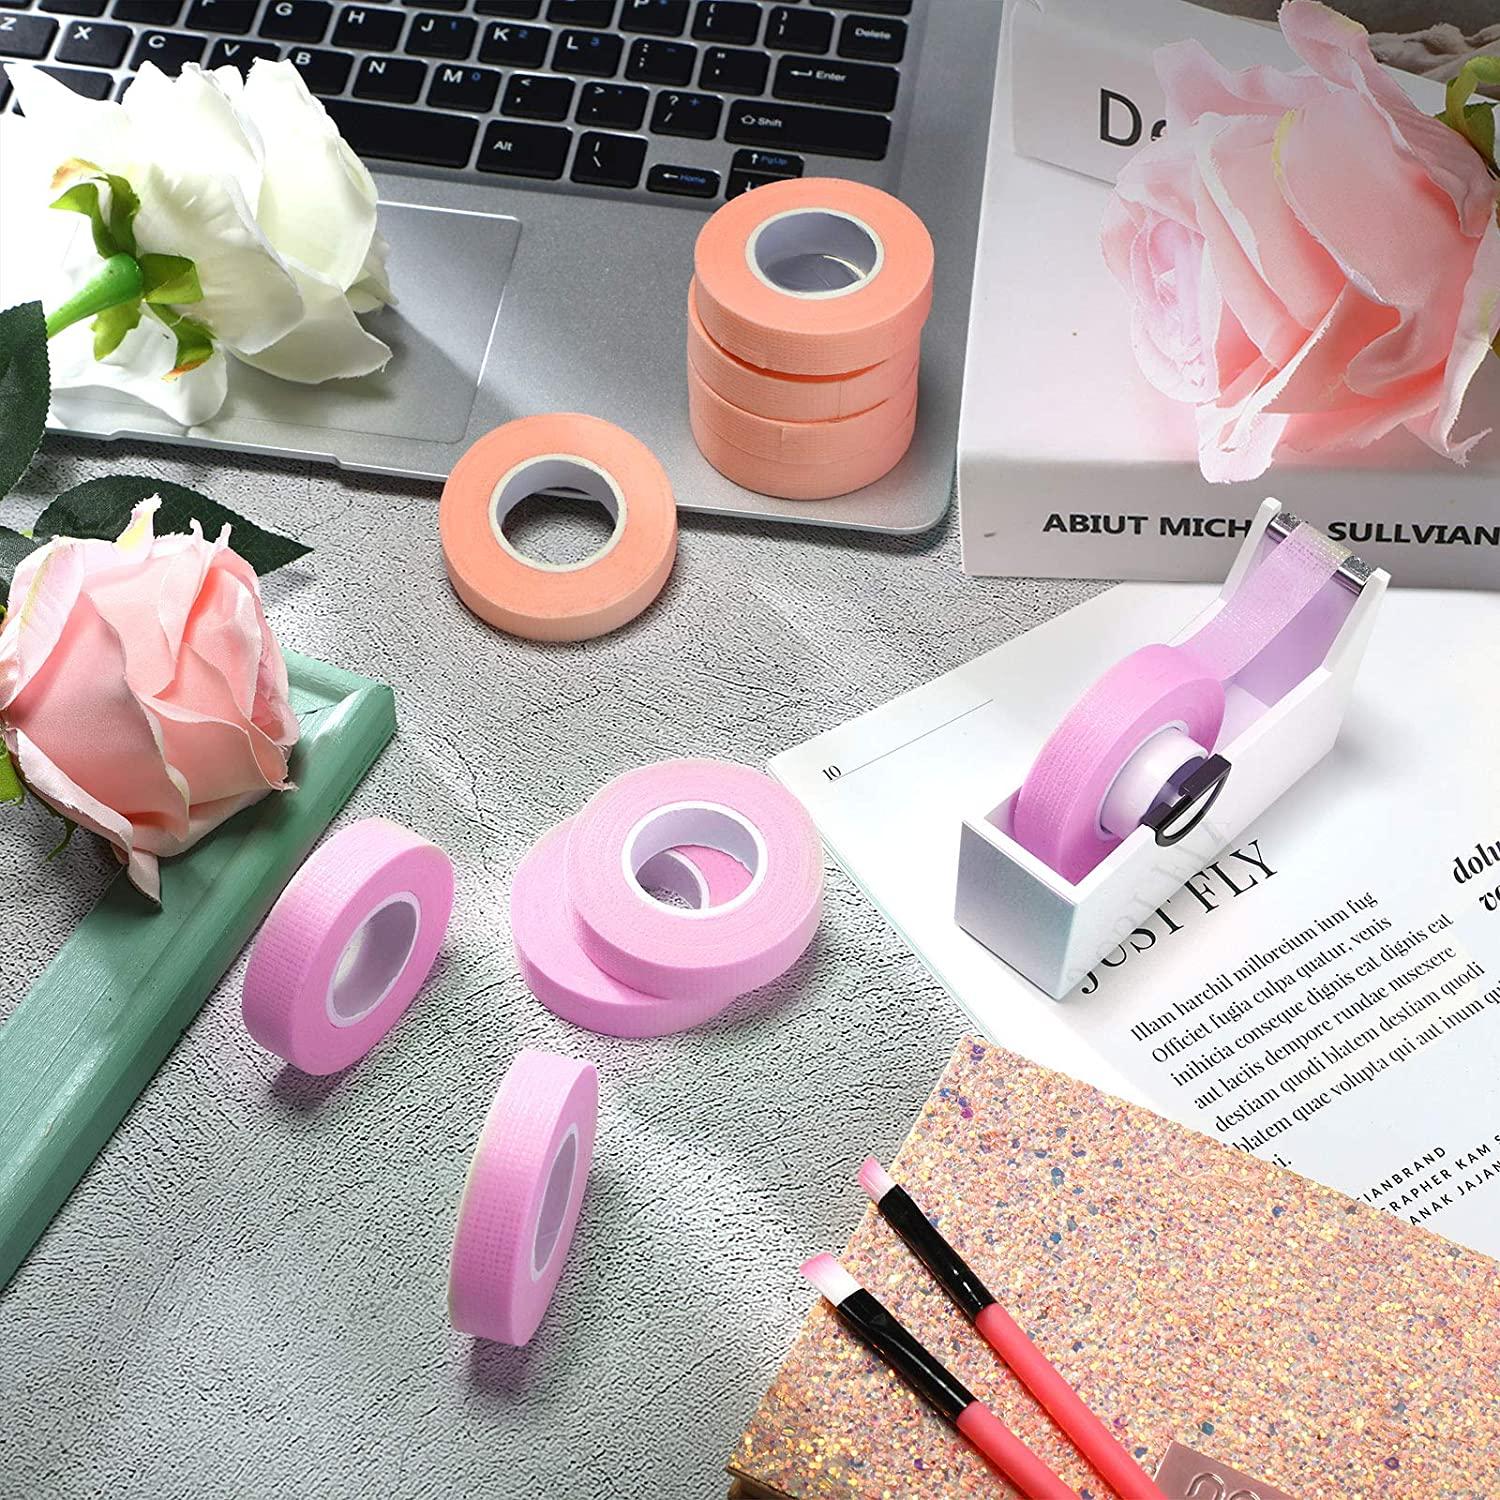 Medical Paper Tapes Makeup Tools Pink Green Color Easy To Tear Comfortable  Breathable Tapes - AliExpress